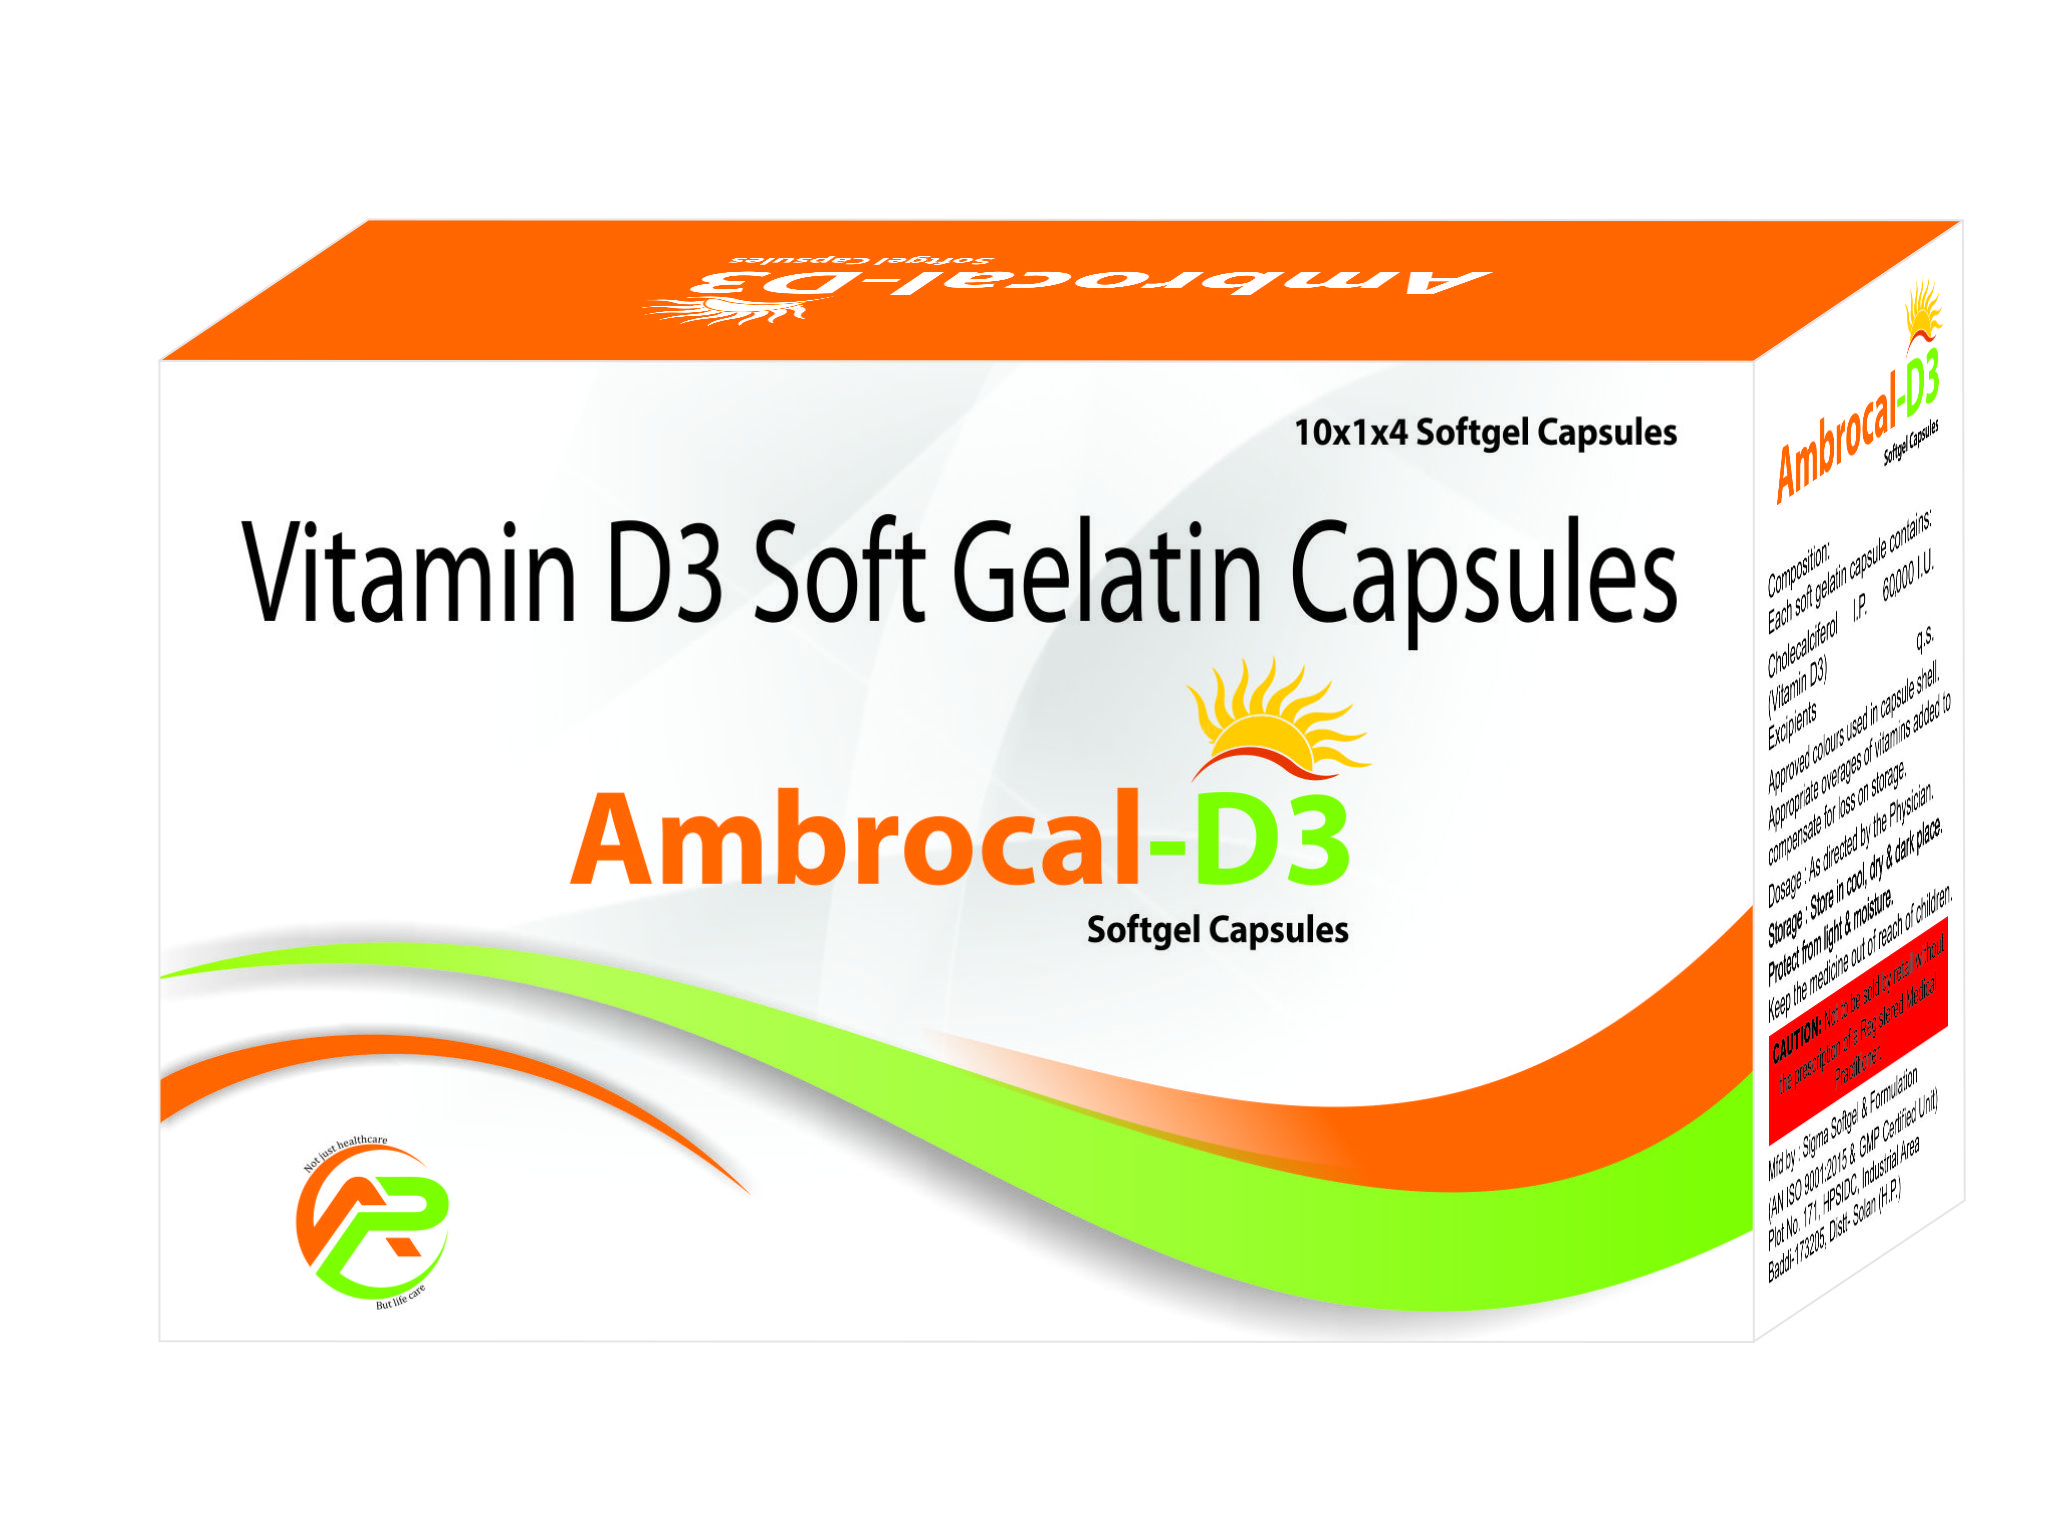 Product Name: Ambrocal D3, Compositions of Ambrocal D3 are Vitamin D3 Soft Gelatin Capsules - Ambrosia Pharma